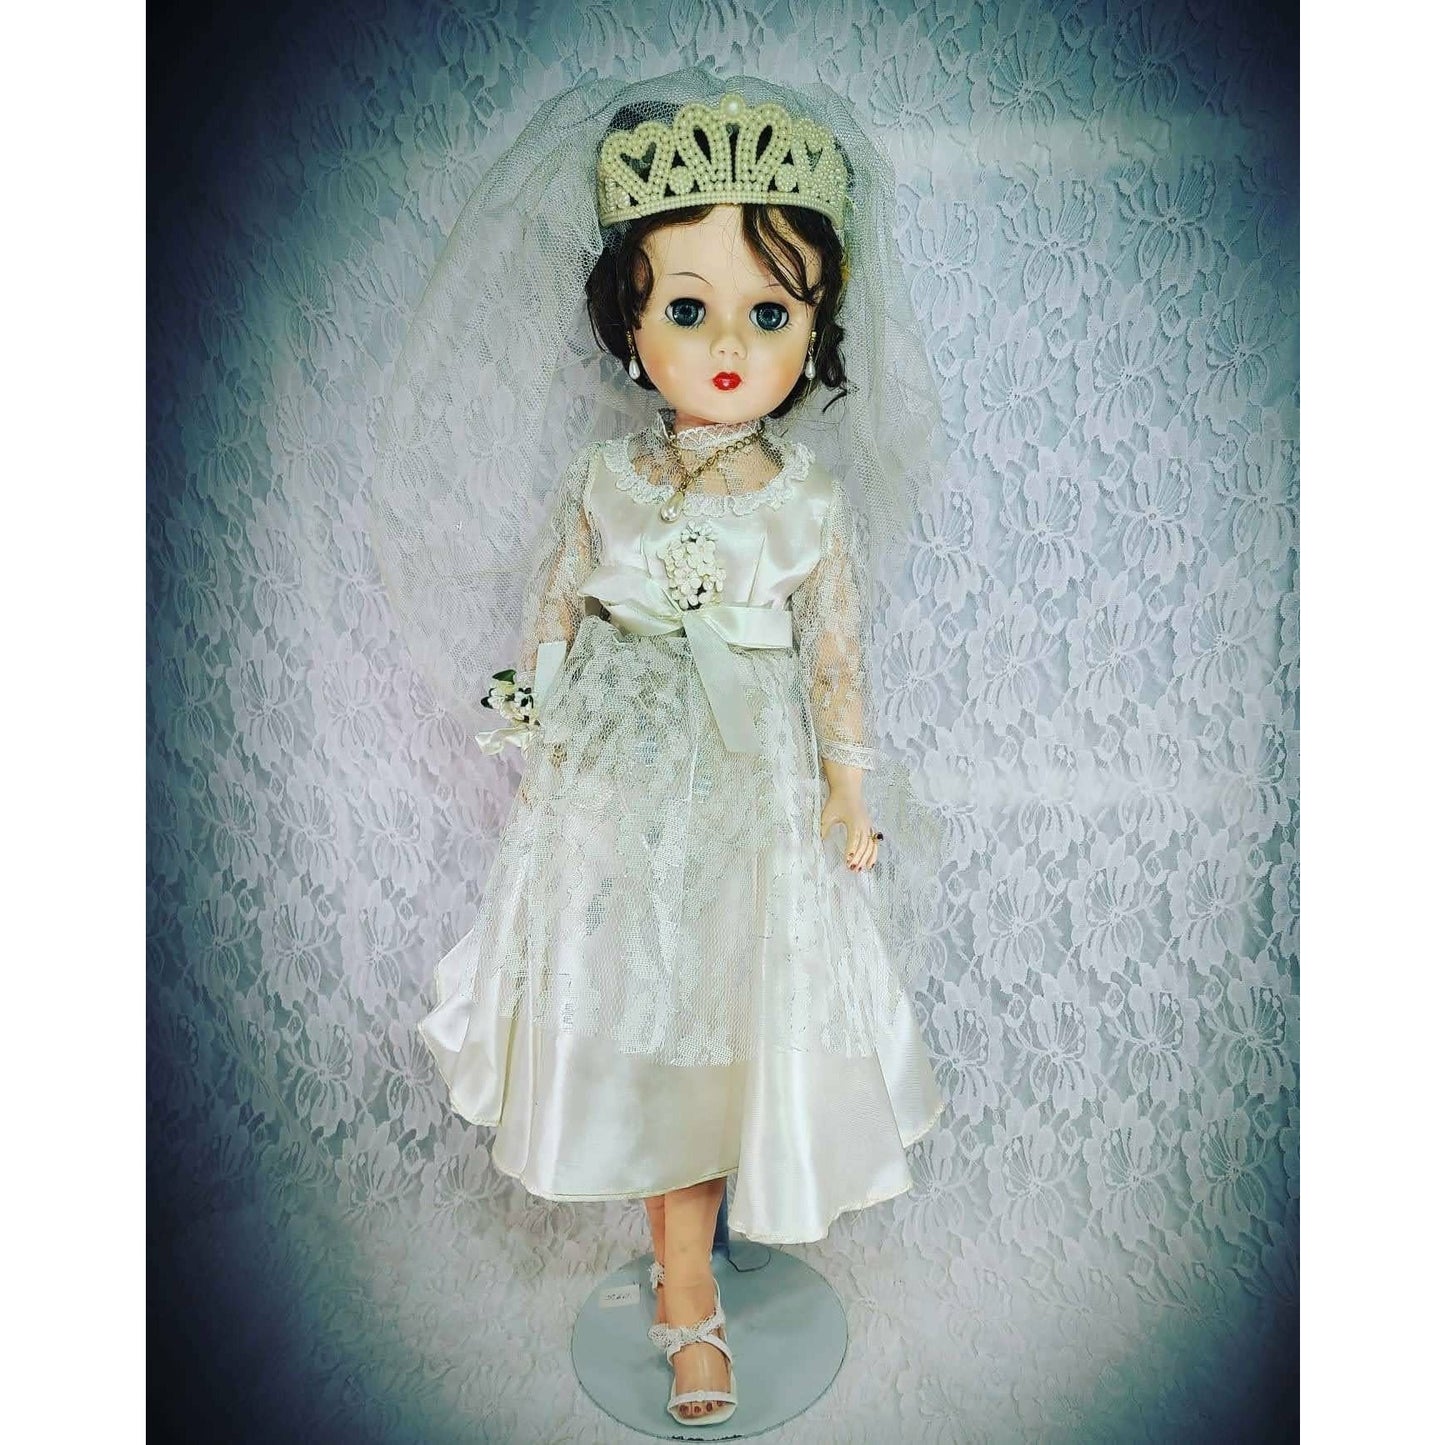 Haunted Doll ~ Cheri BIG 21" Vinyl Stuffed Grocery Store Bride Doll ~ Paranormal ~ Tormented Soul ~ Desperate for a Life